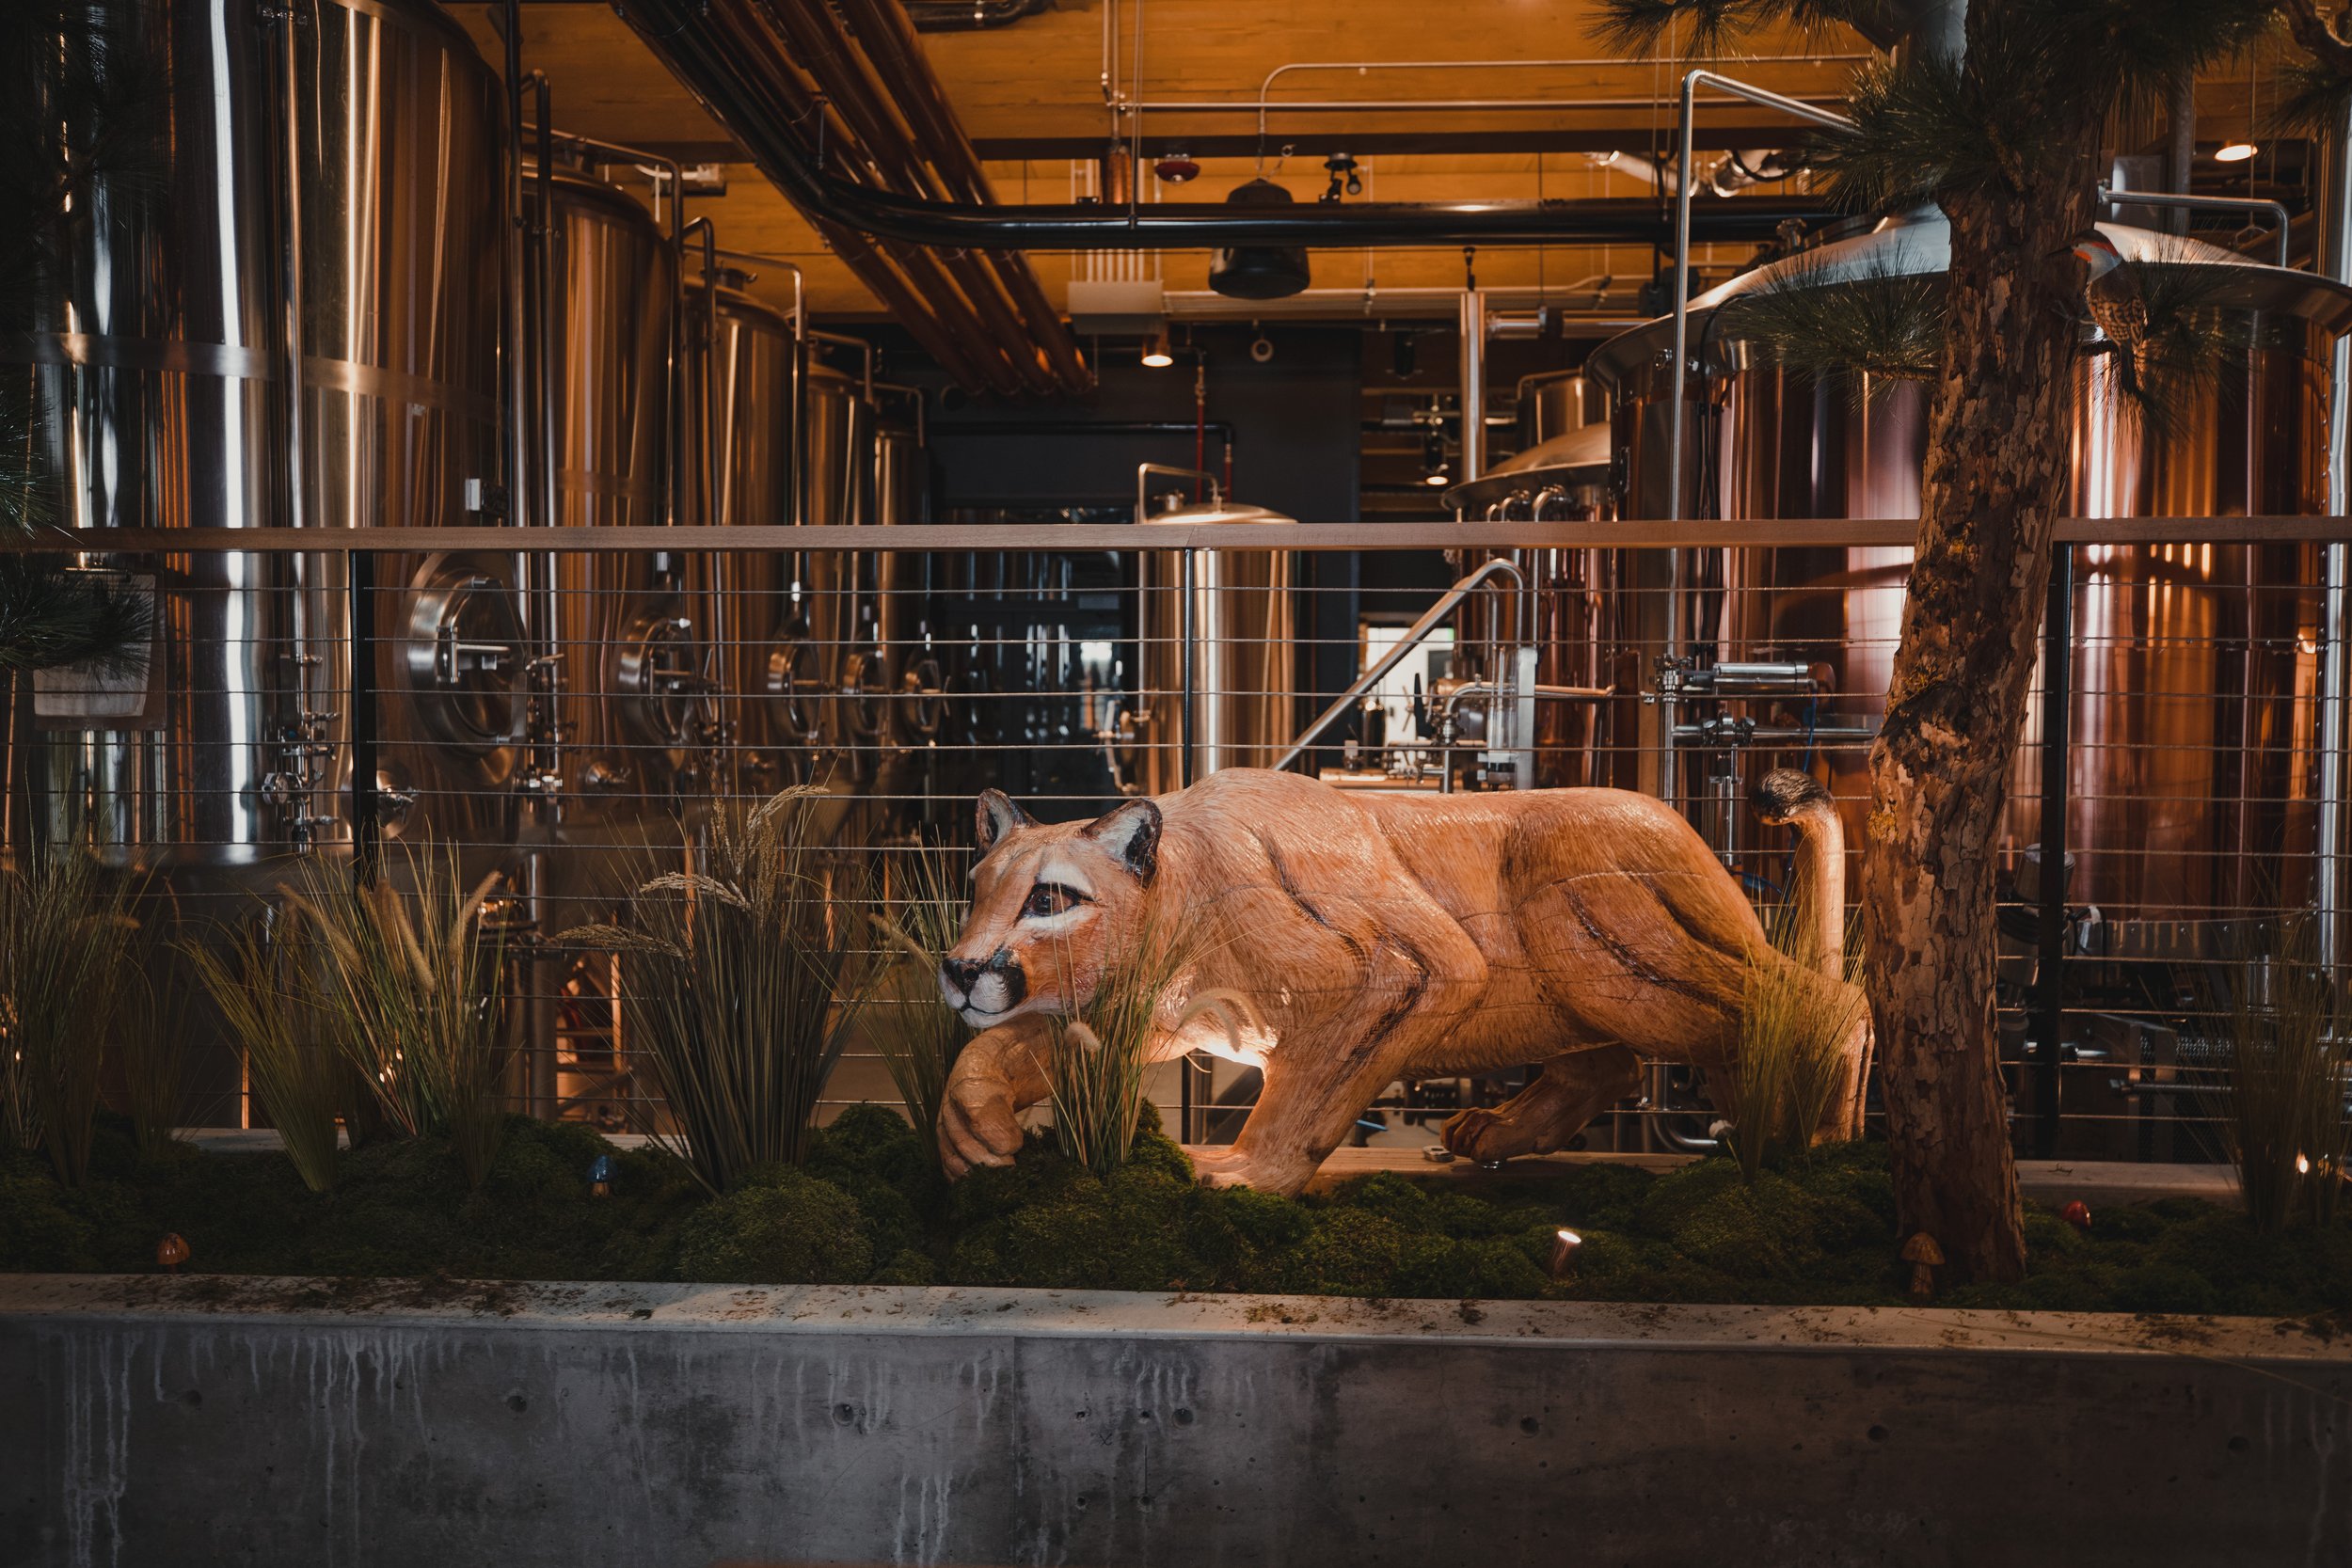 Cougar Doug guards the Brewery